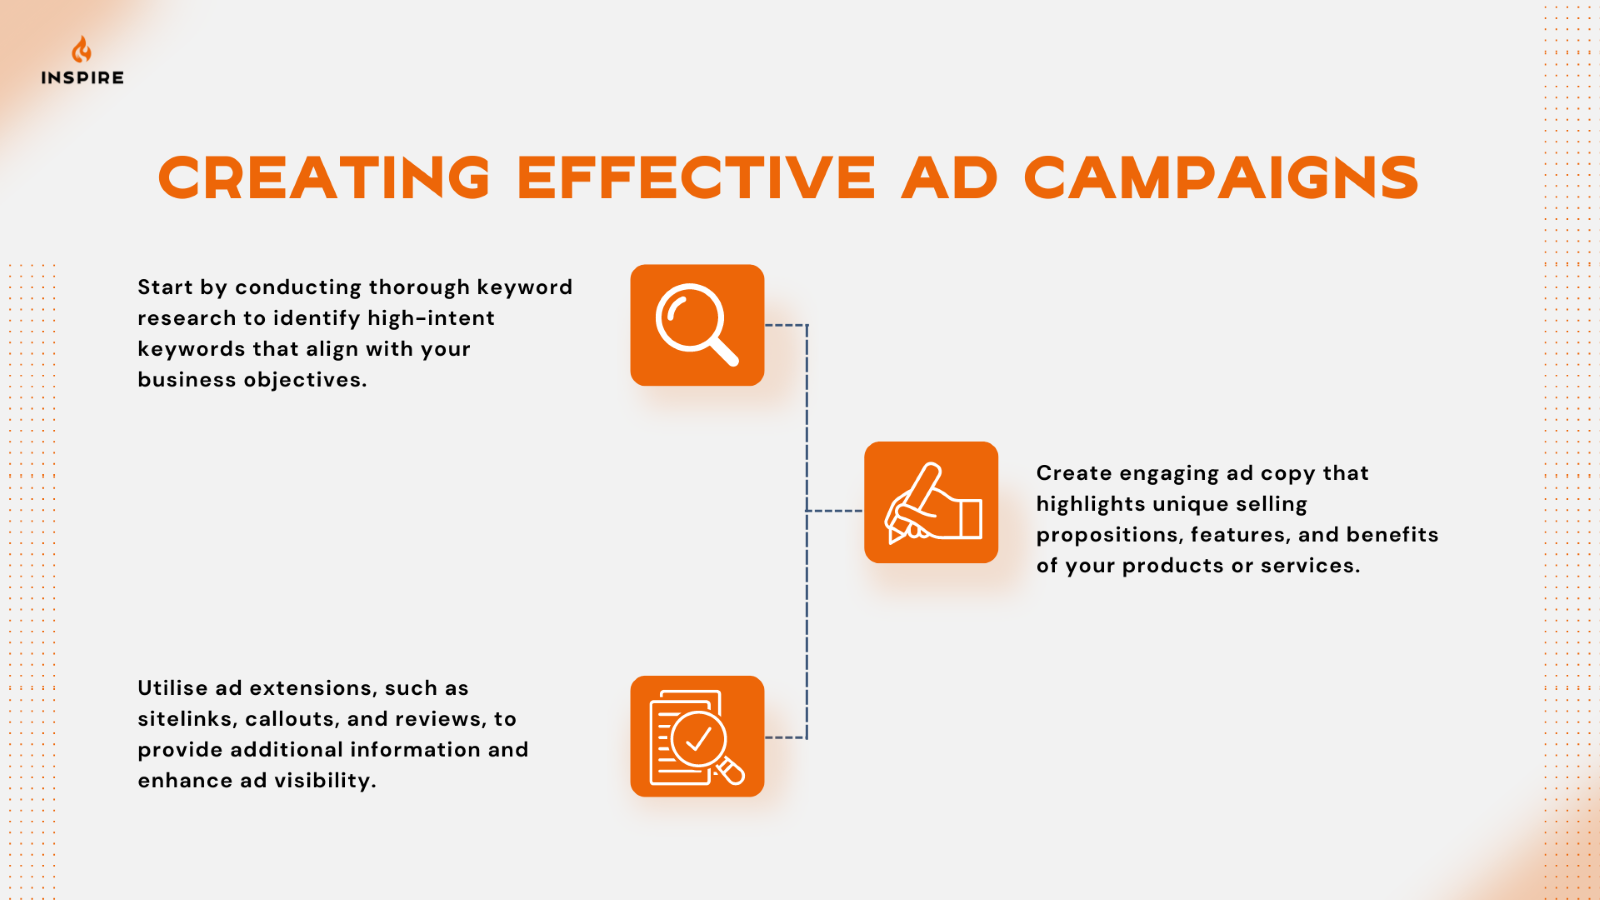 Creating effective ad campaigns